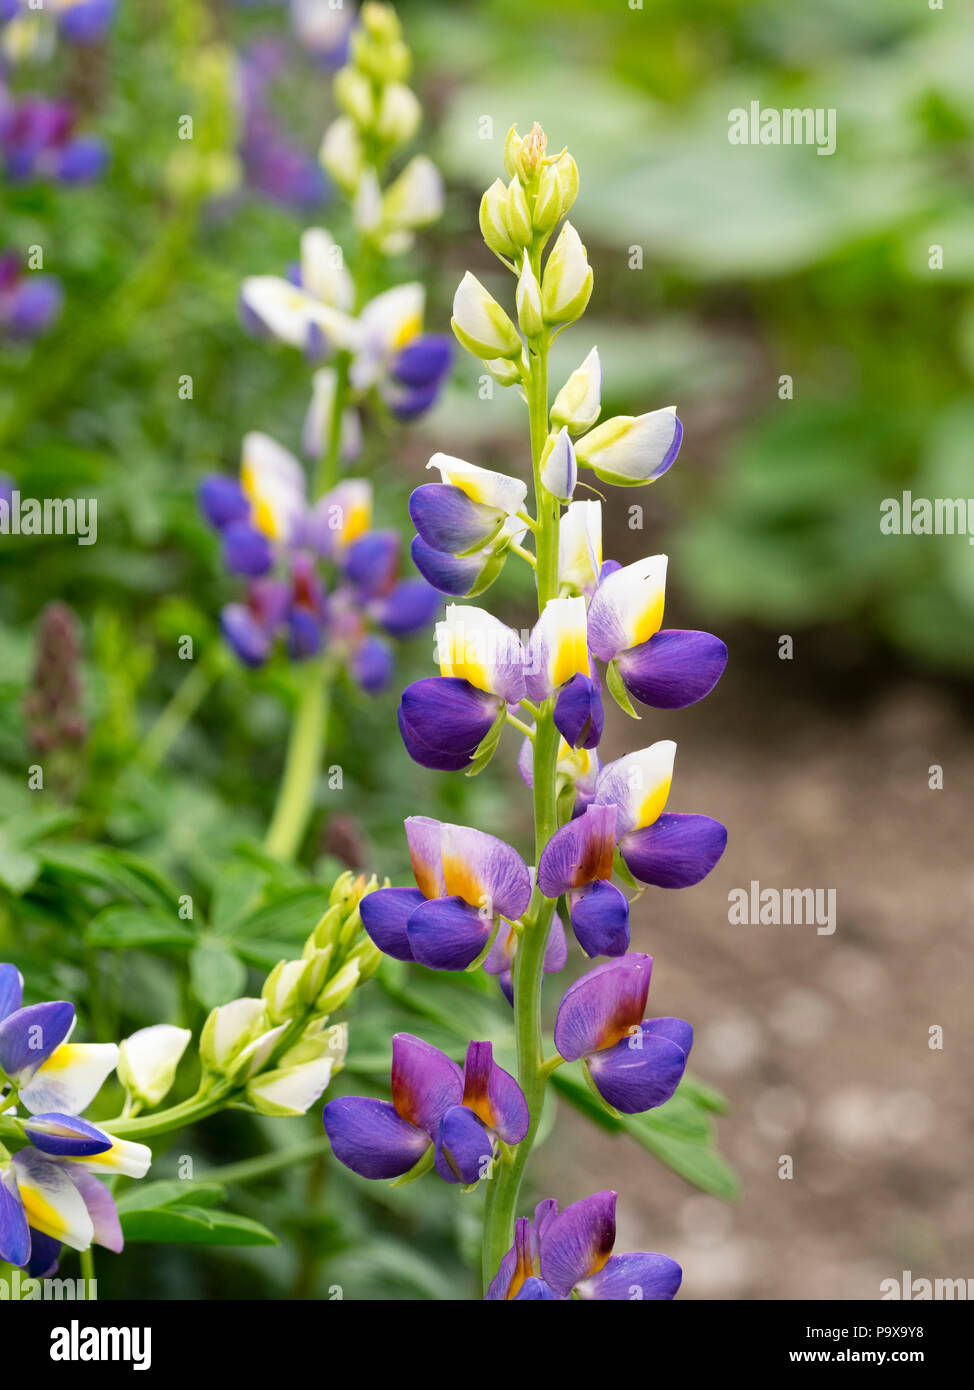 Upright spikes carry yellow, white and blue flowers of the hardy annual lupin, Lupinus 'Sunrise' Stock Photo